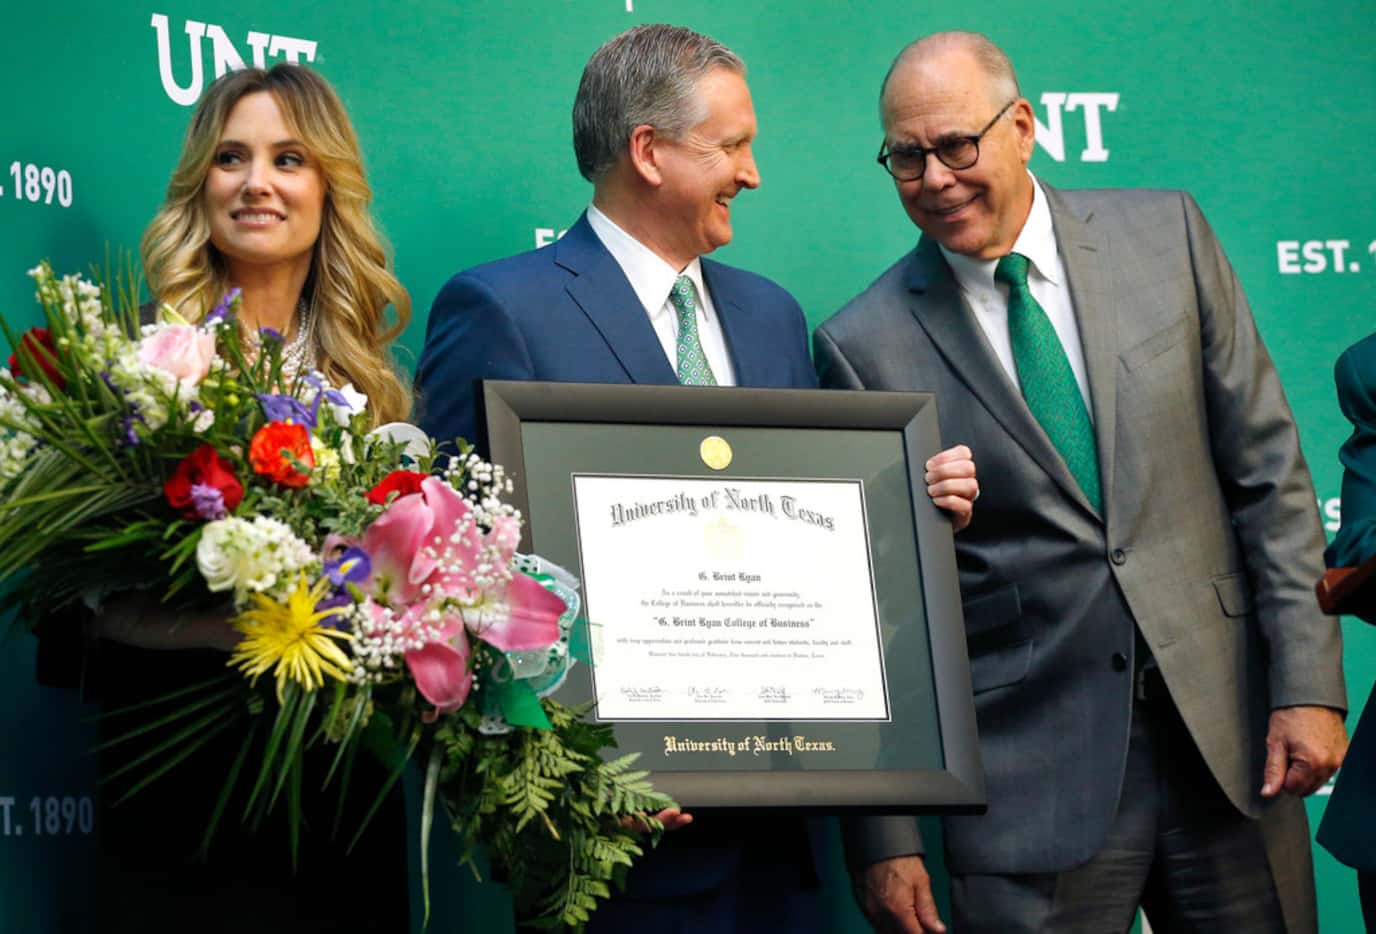 Amanda and G. Brint Ryan (center) were recognized by University of North Texas President...